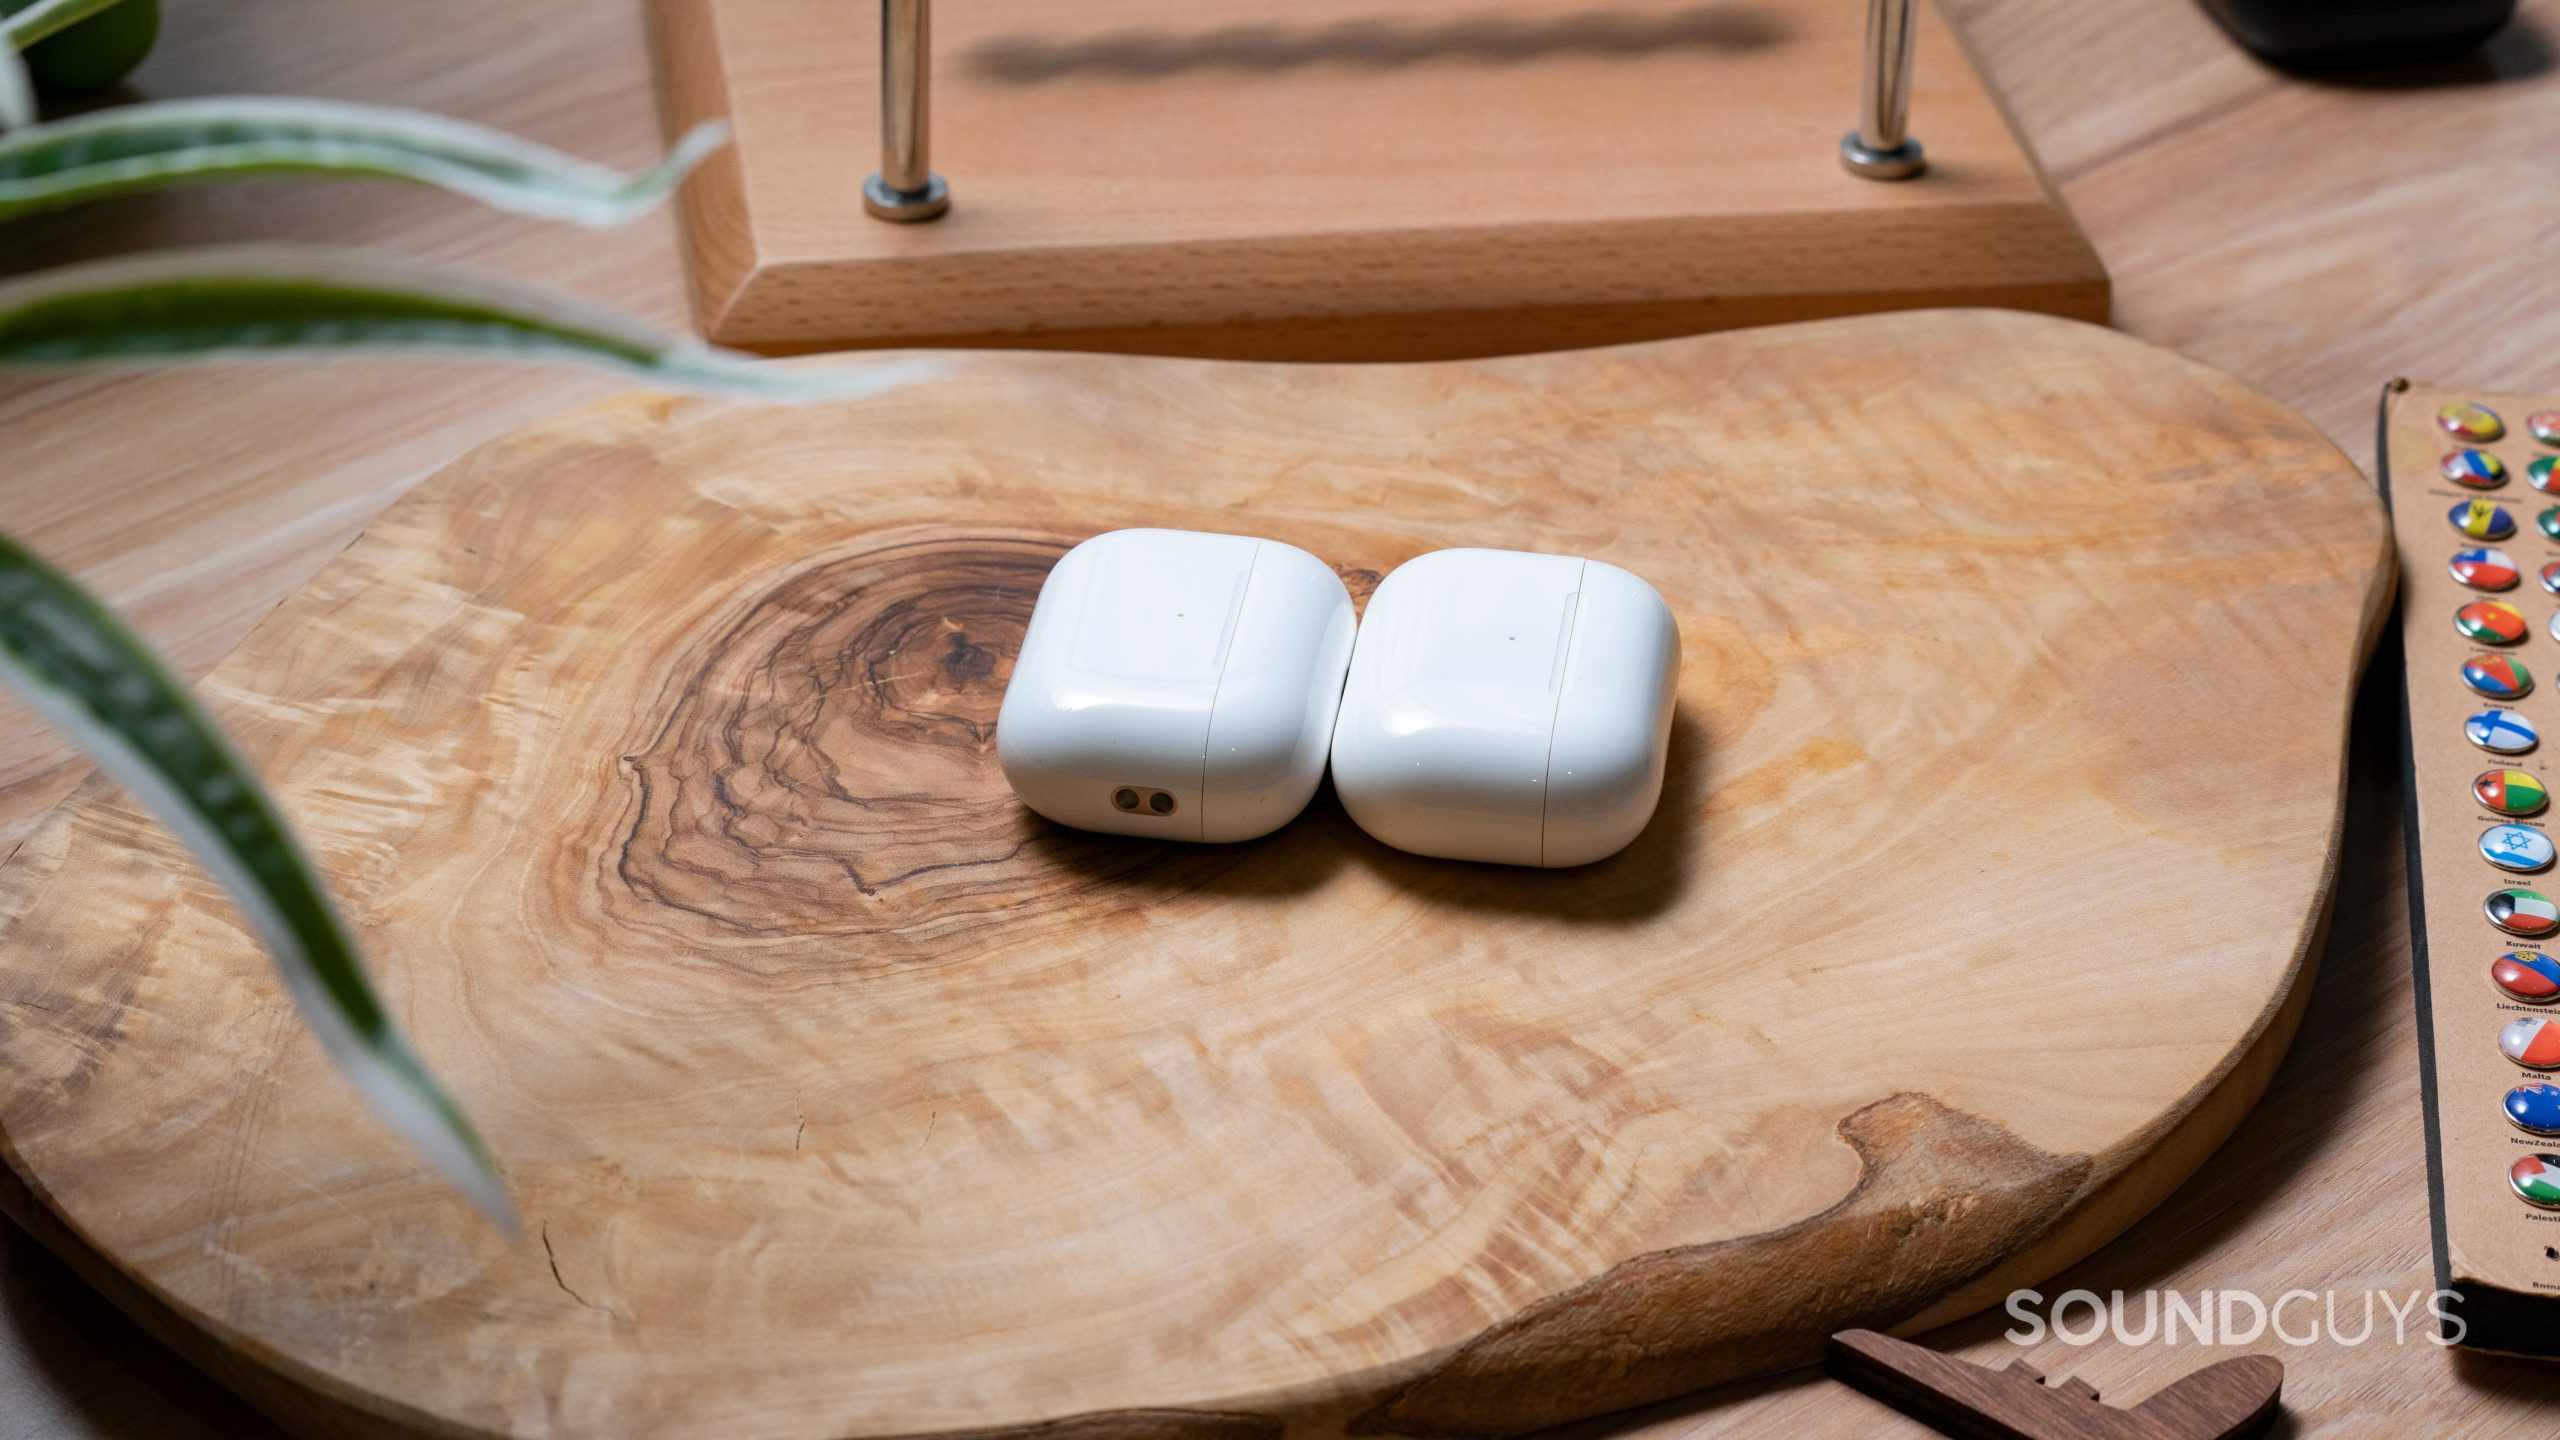 The Apple AirPods Pro (2nd generation) case lays on a wooden surface next to the Apple AirPods Pro (1st generation) case.